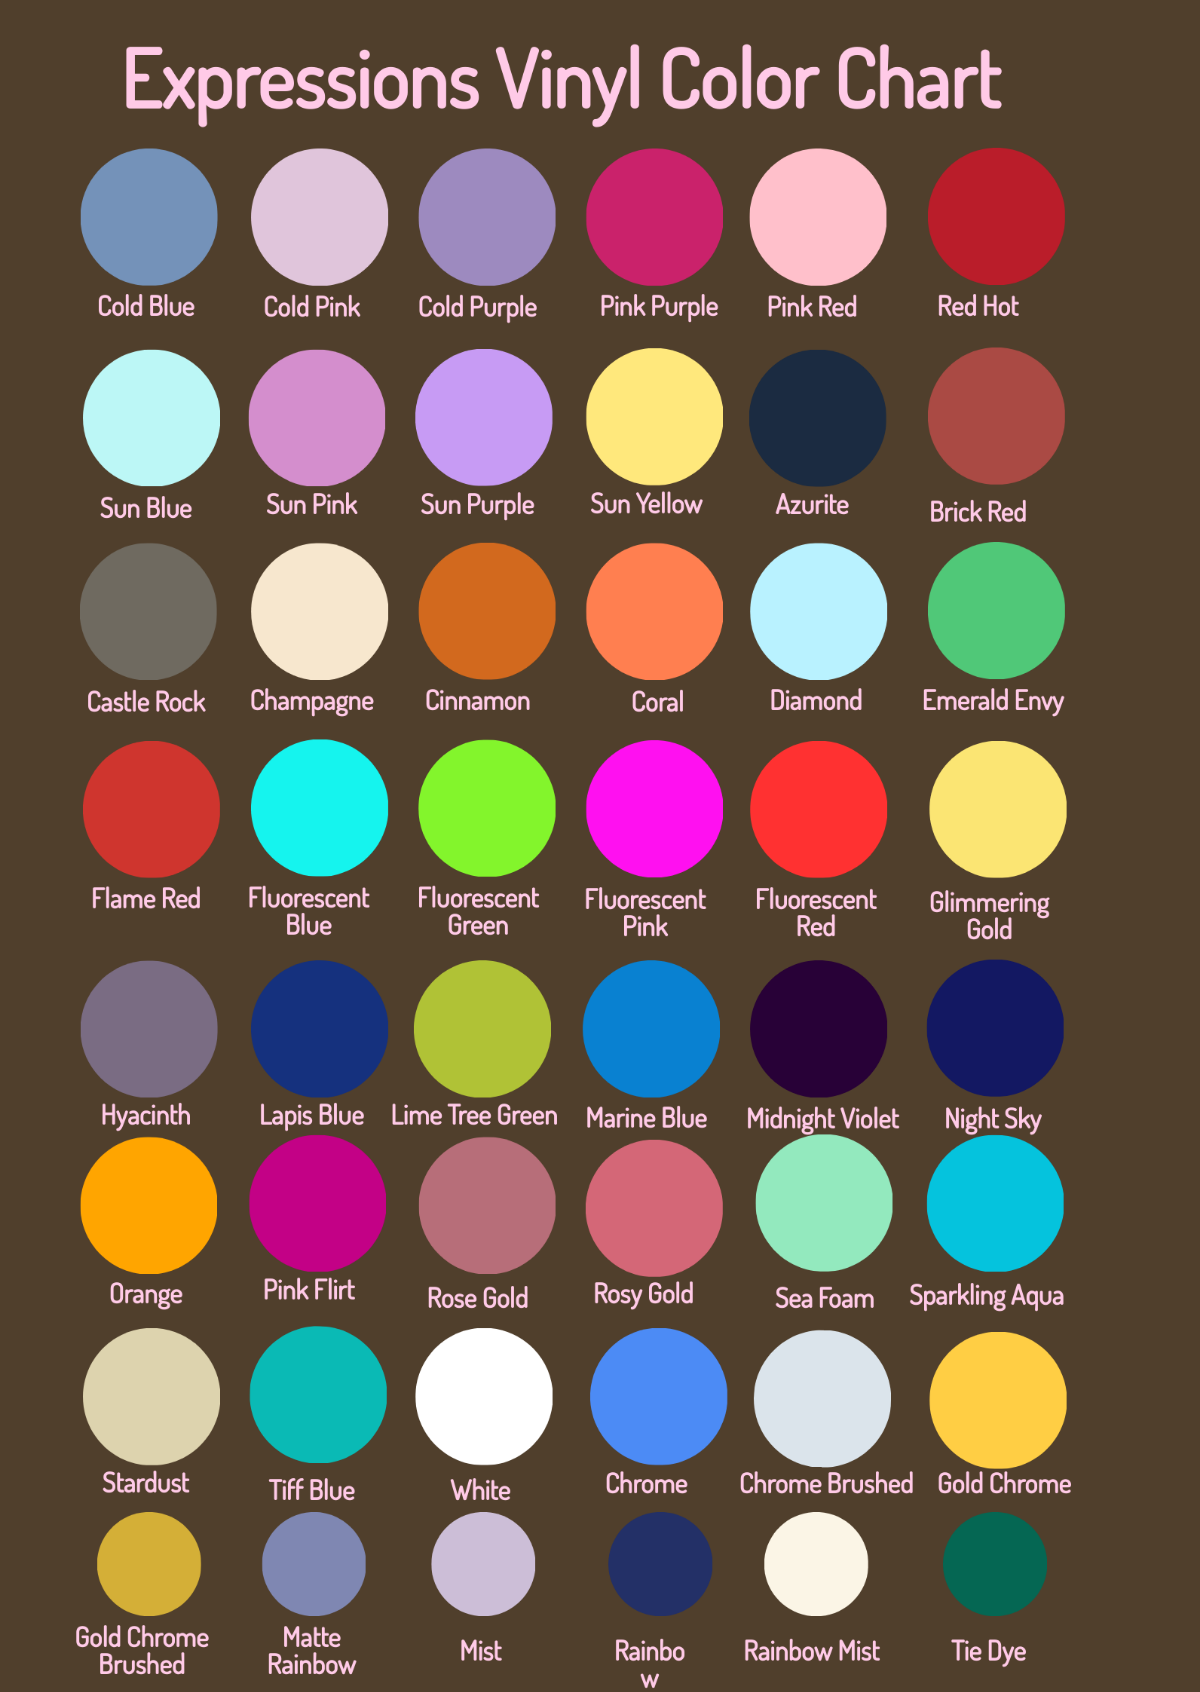 Expressions Vinyl Color Chart Template